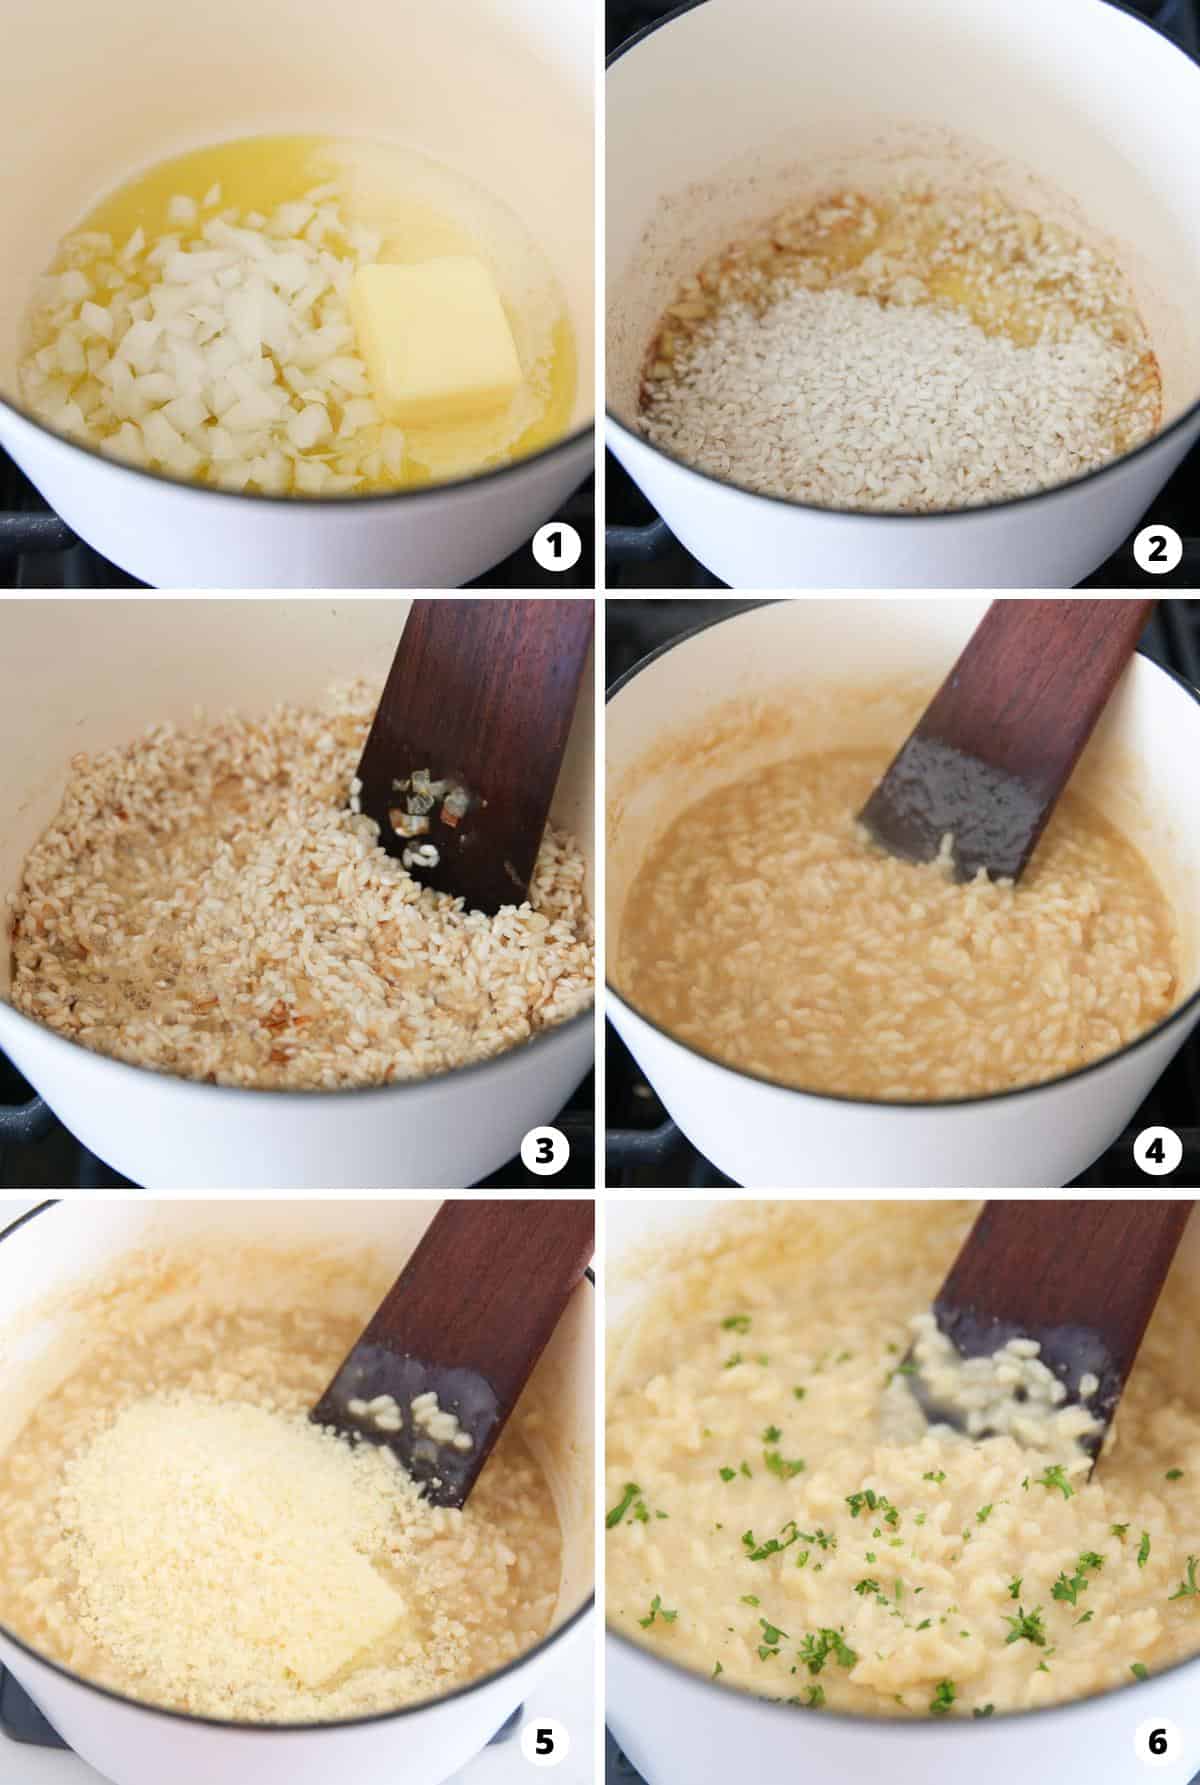 Showing how to make risotto.